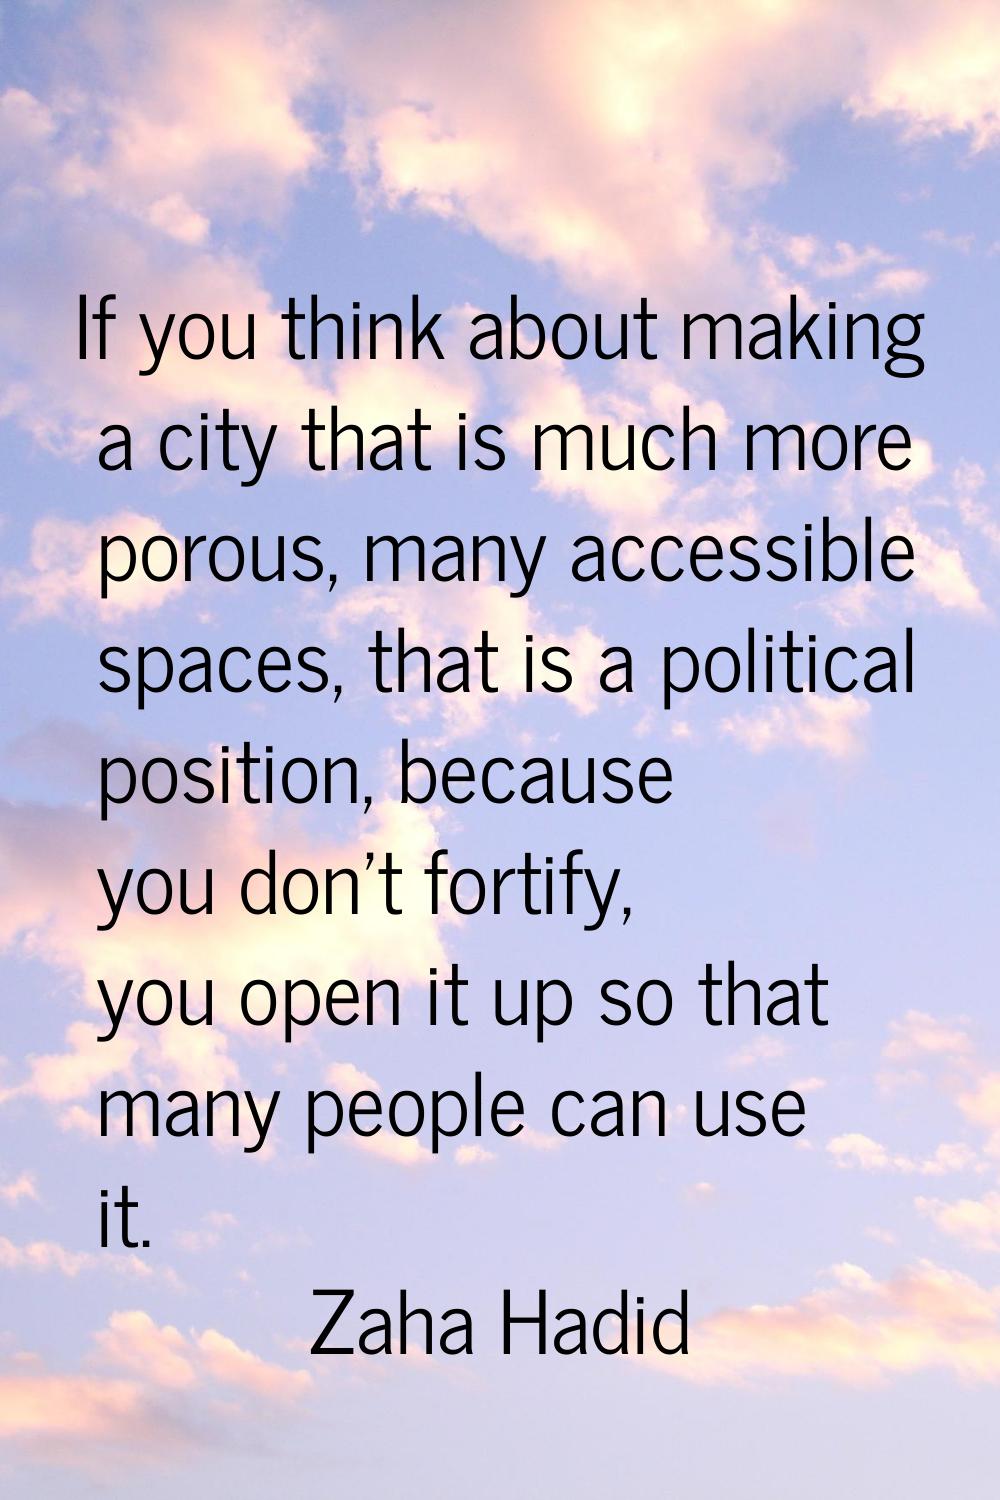 If you think about making a city that is much more porous, many accessible spaces, that is a politi